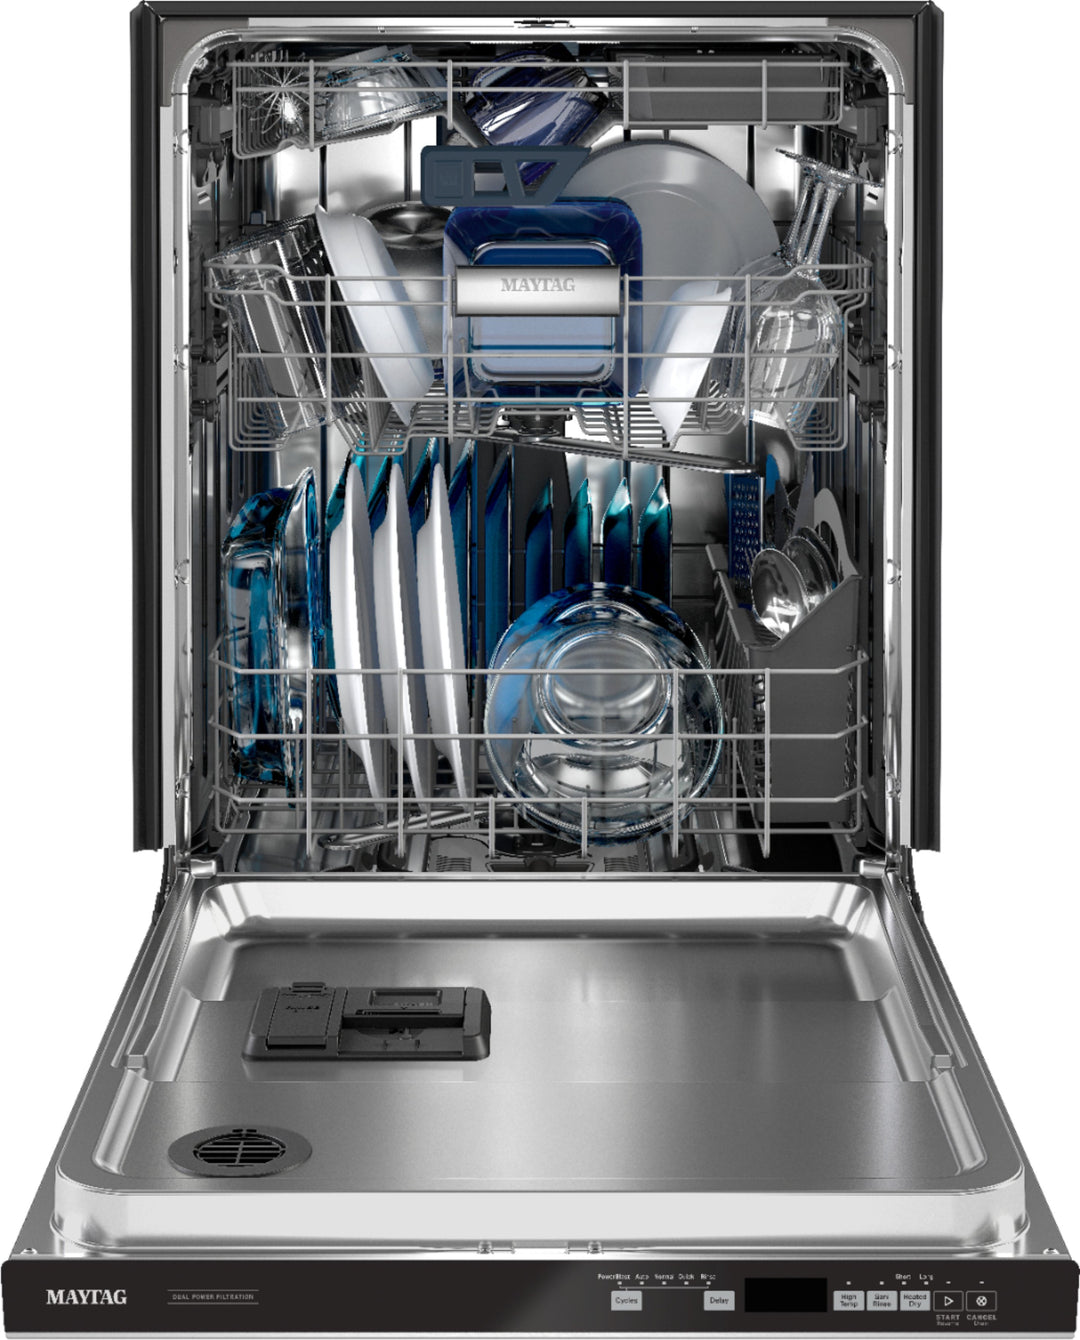 Maytag - Top Control Built-In Dishwasher with Stainless Steel Tub, Dual Power Filtration, 3rd Rack, 47dBA - Stainless steel_7